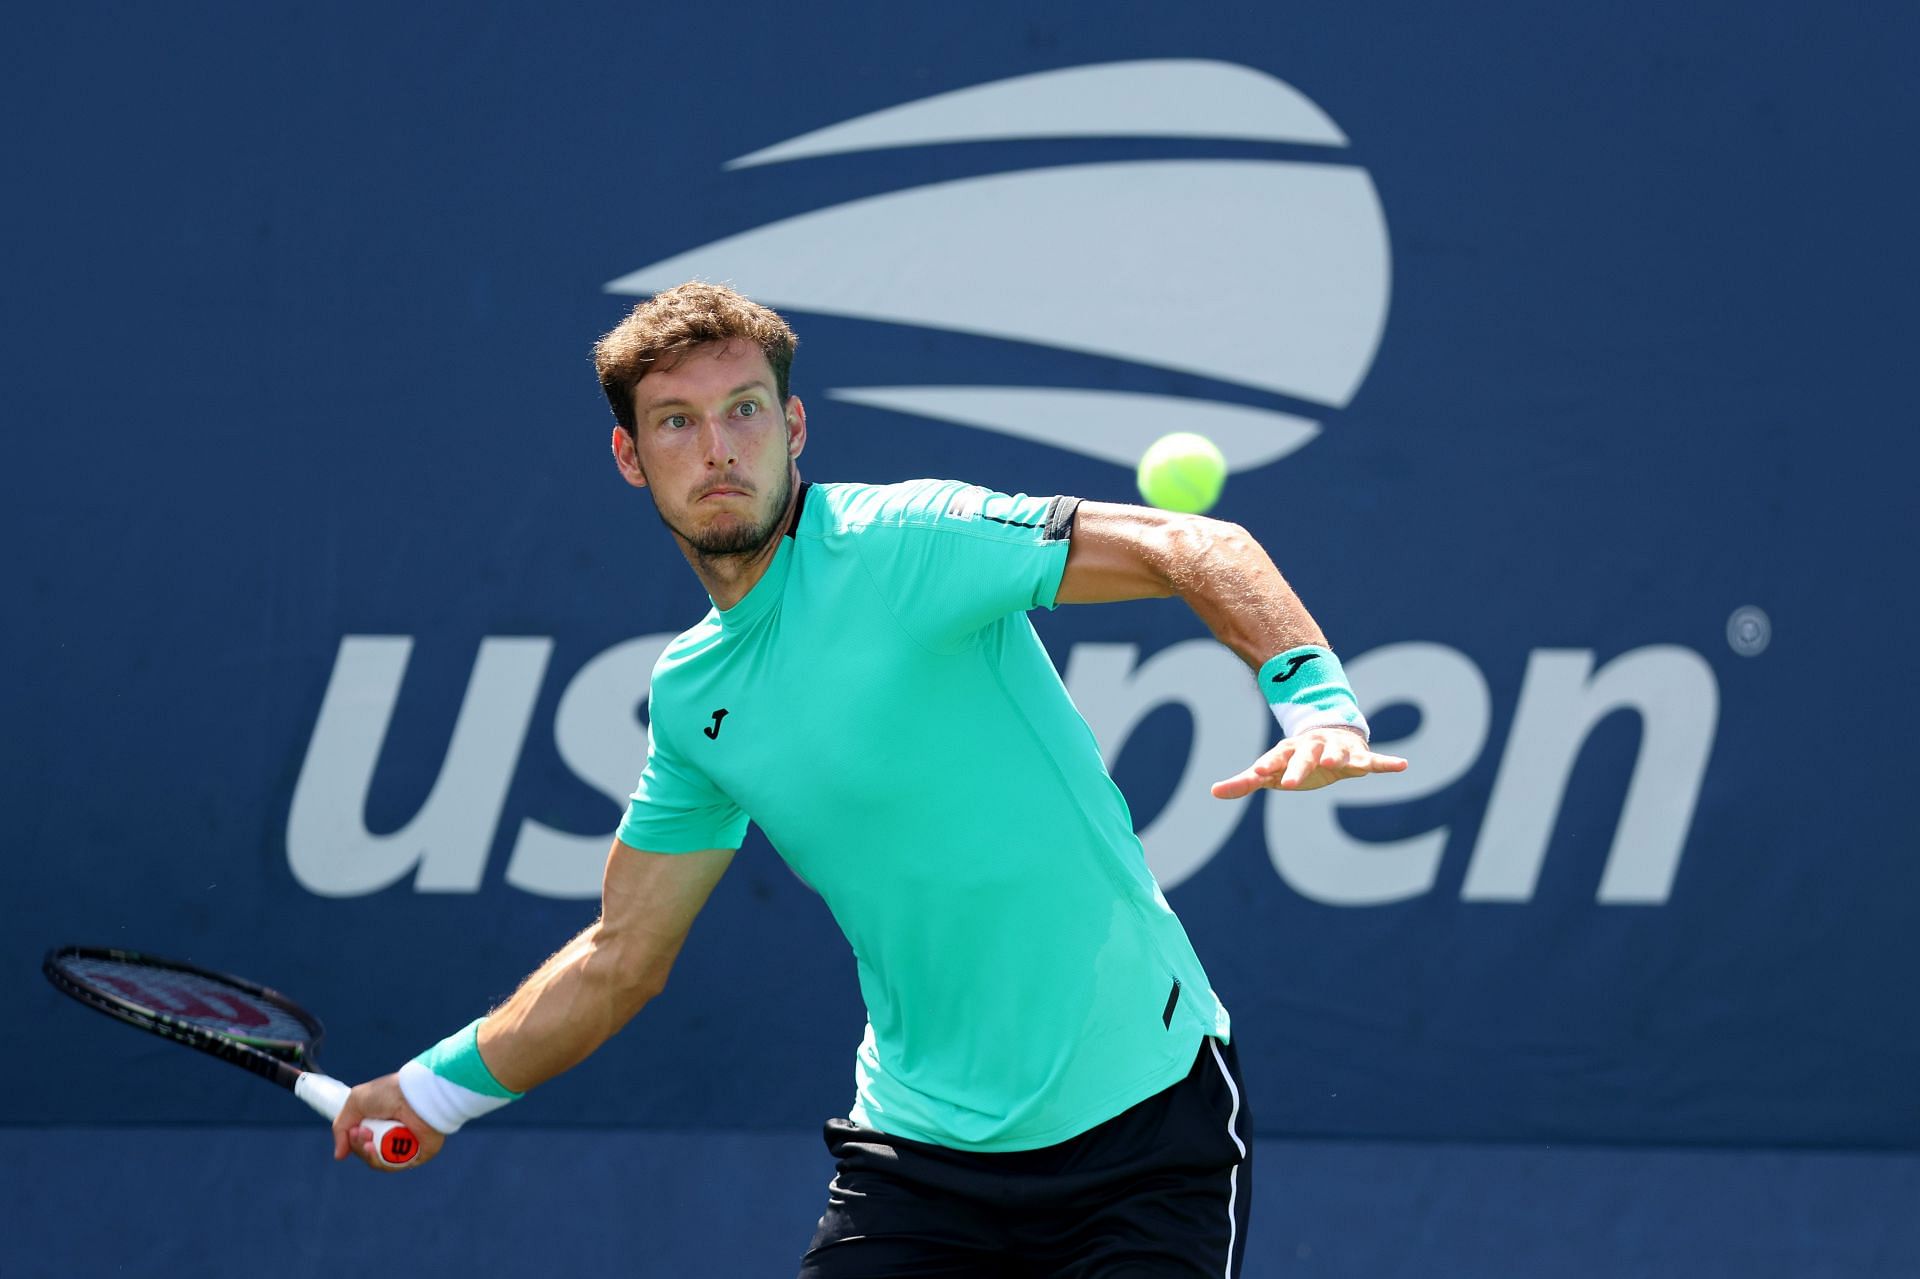 Carreno Busta is a two-time semifinalist at the US Open